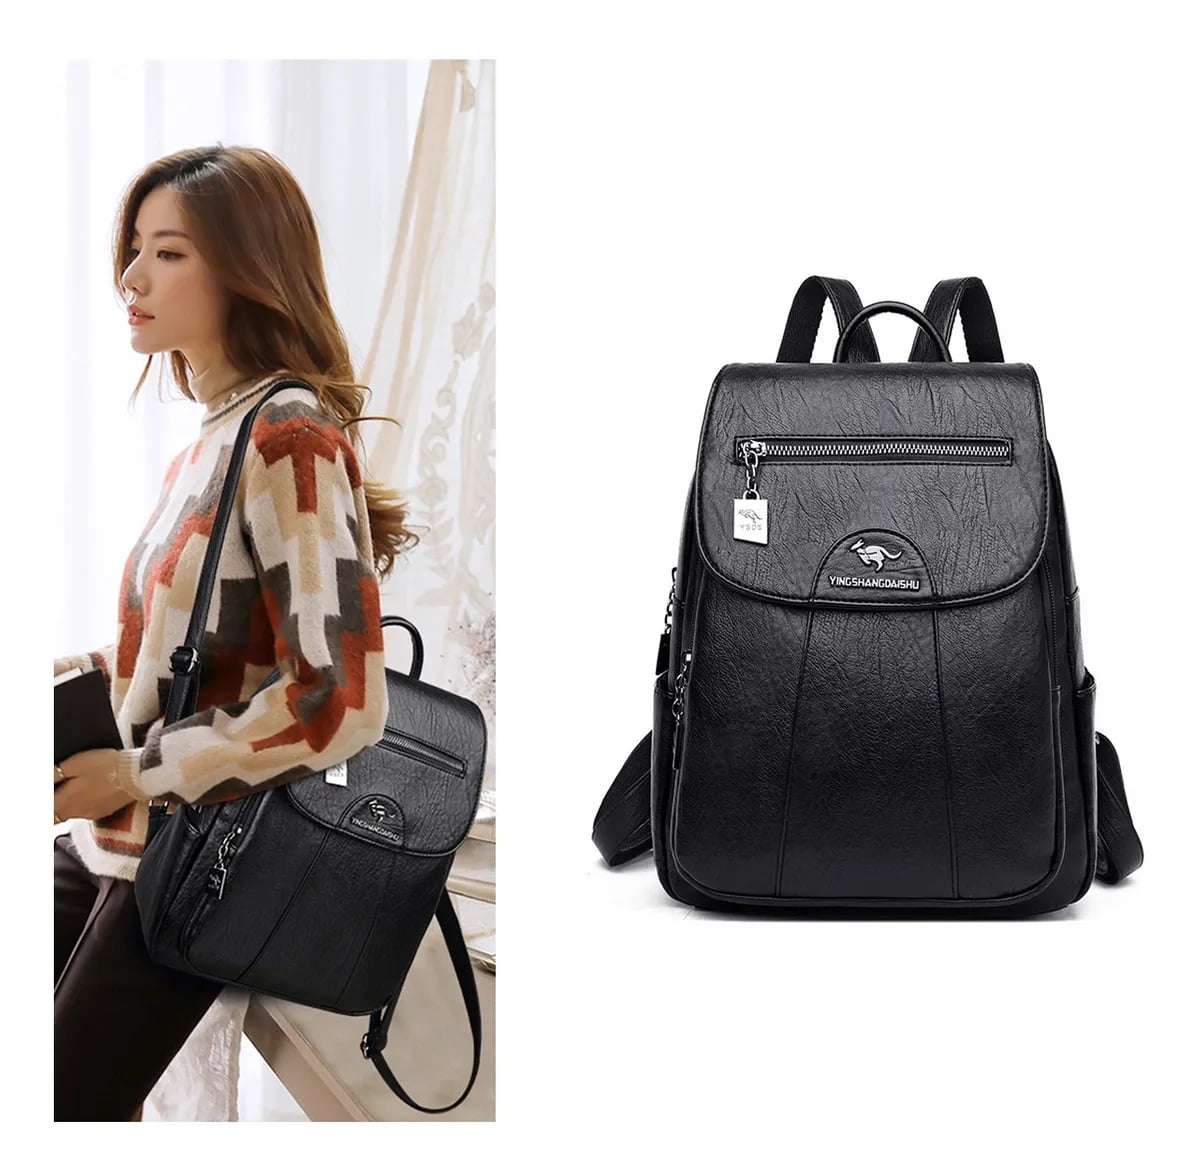 Black Leather-Look Backpack | New Look